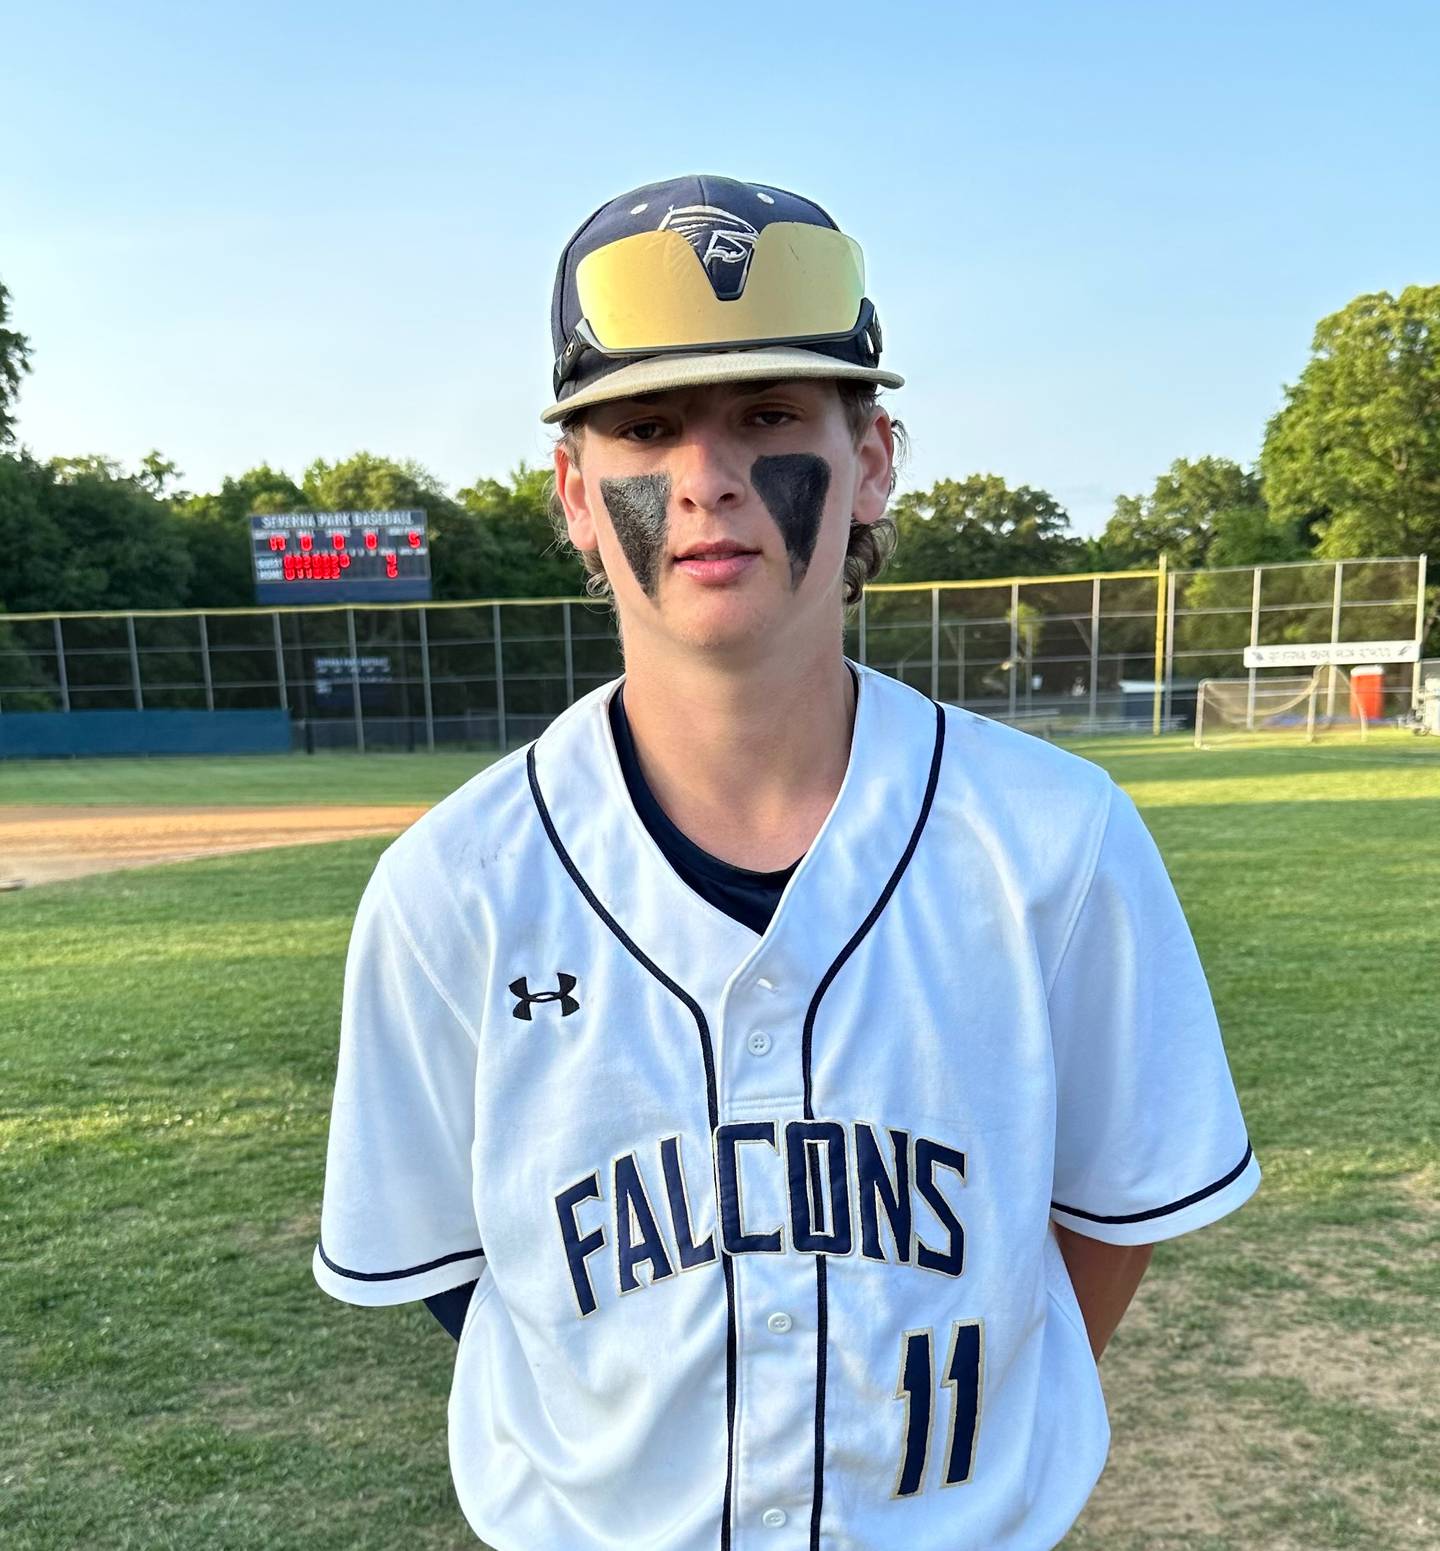 Nathan Clarke pitched six strong innings for Severna Park Friday afternoon against Walt Whitman in a Class 4A state baseball quarterfinal contest in Anne Arundel. The No. 5 Falcons outlast Montgomery County's Walt Whitman, 6-4, to advance Tuesday's state semifinals at Povich Field in Montgomery County.